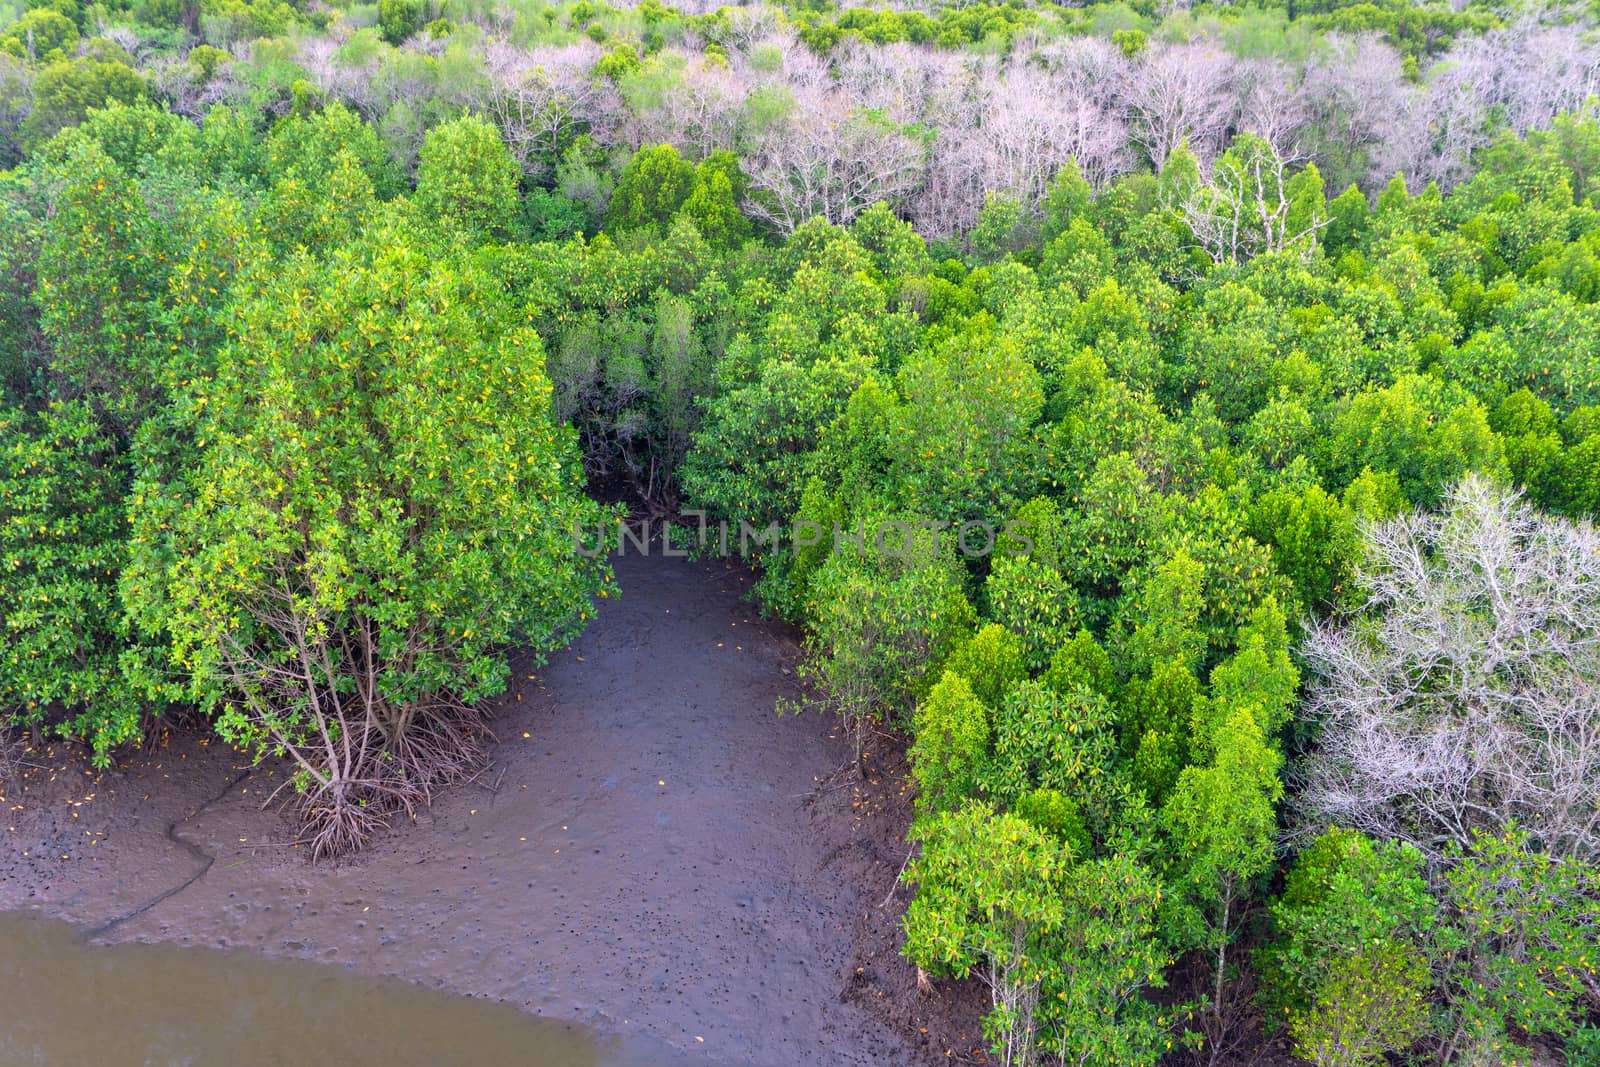 Above view of mangrove forest in thailand by pkproject